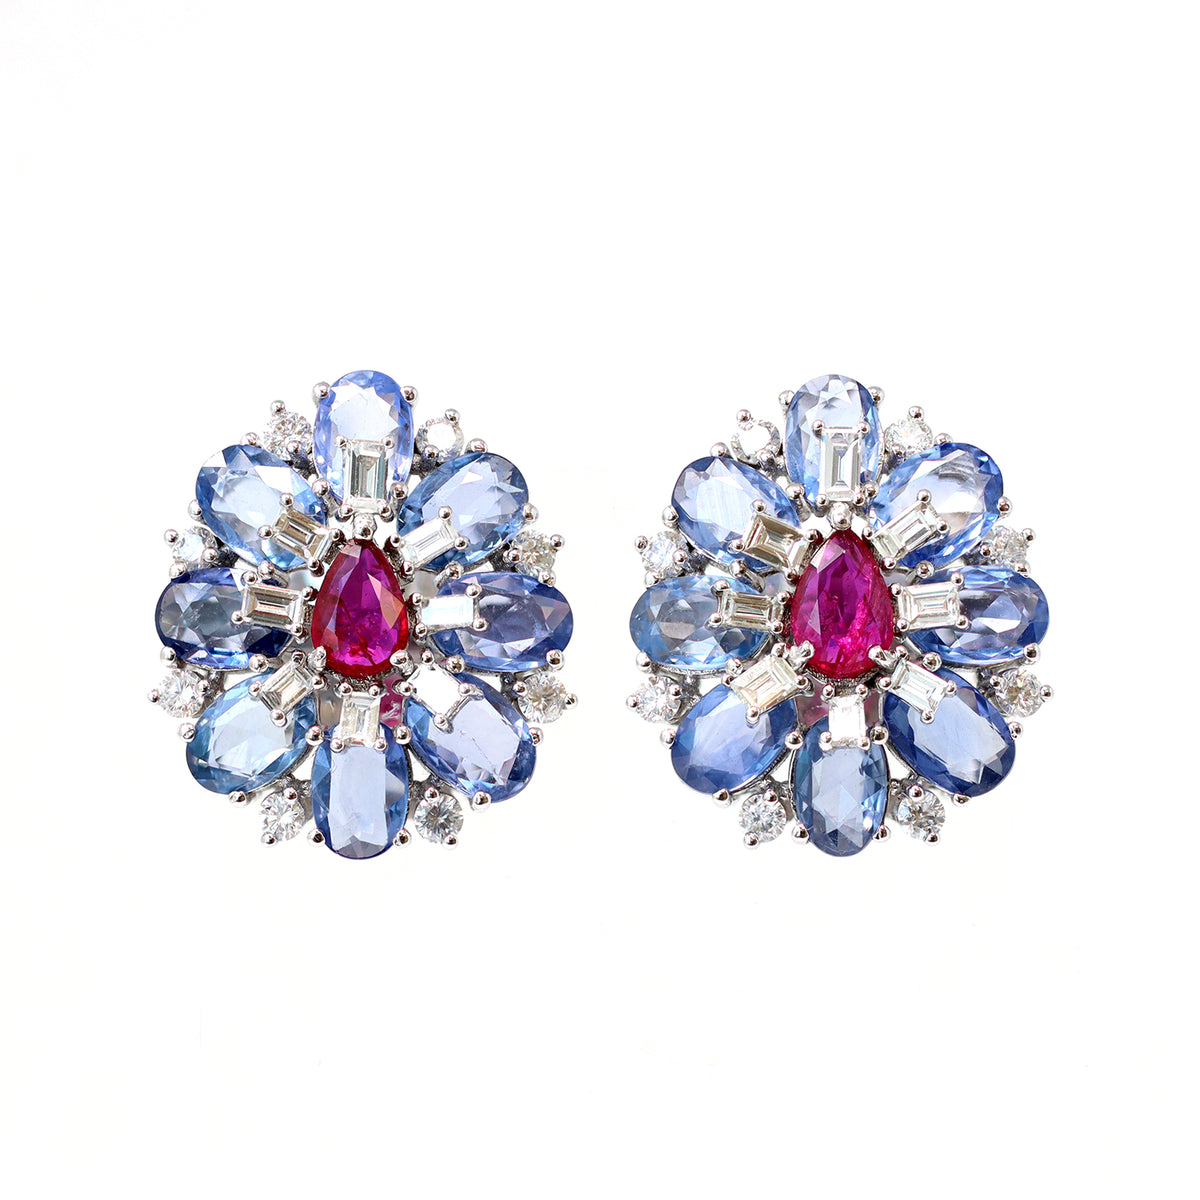 sapphire-diamond-and-ruby-earrings-set-in-18-karat-white-gold-front-view-2000x2000.jpg